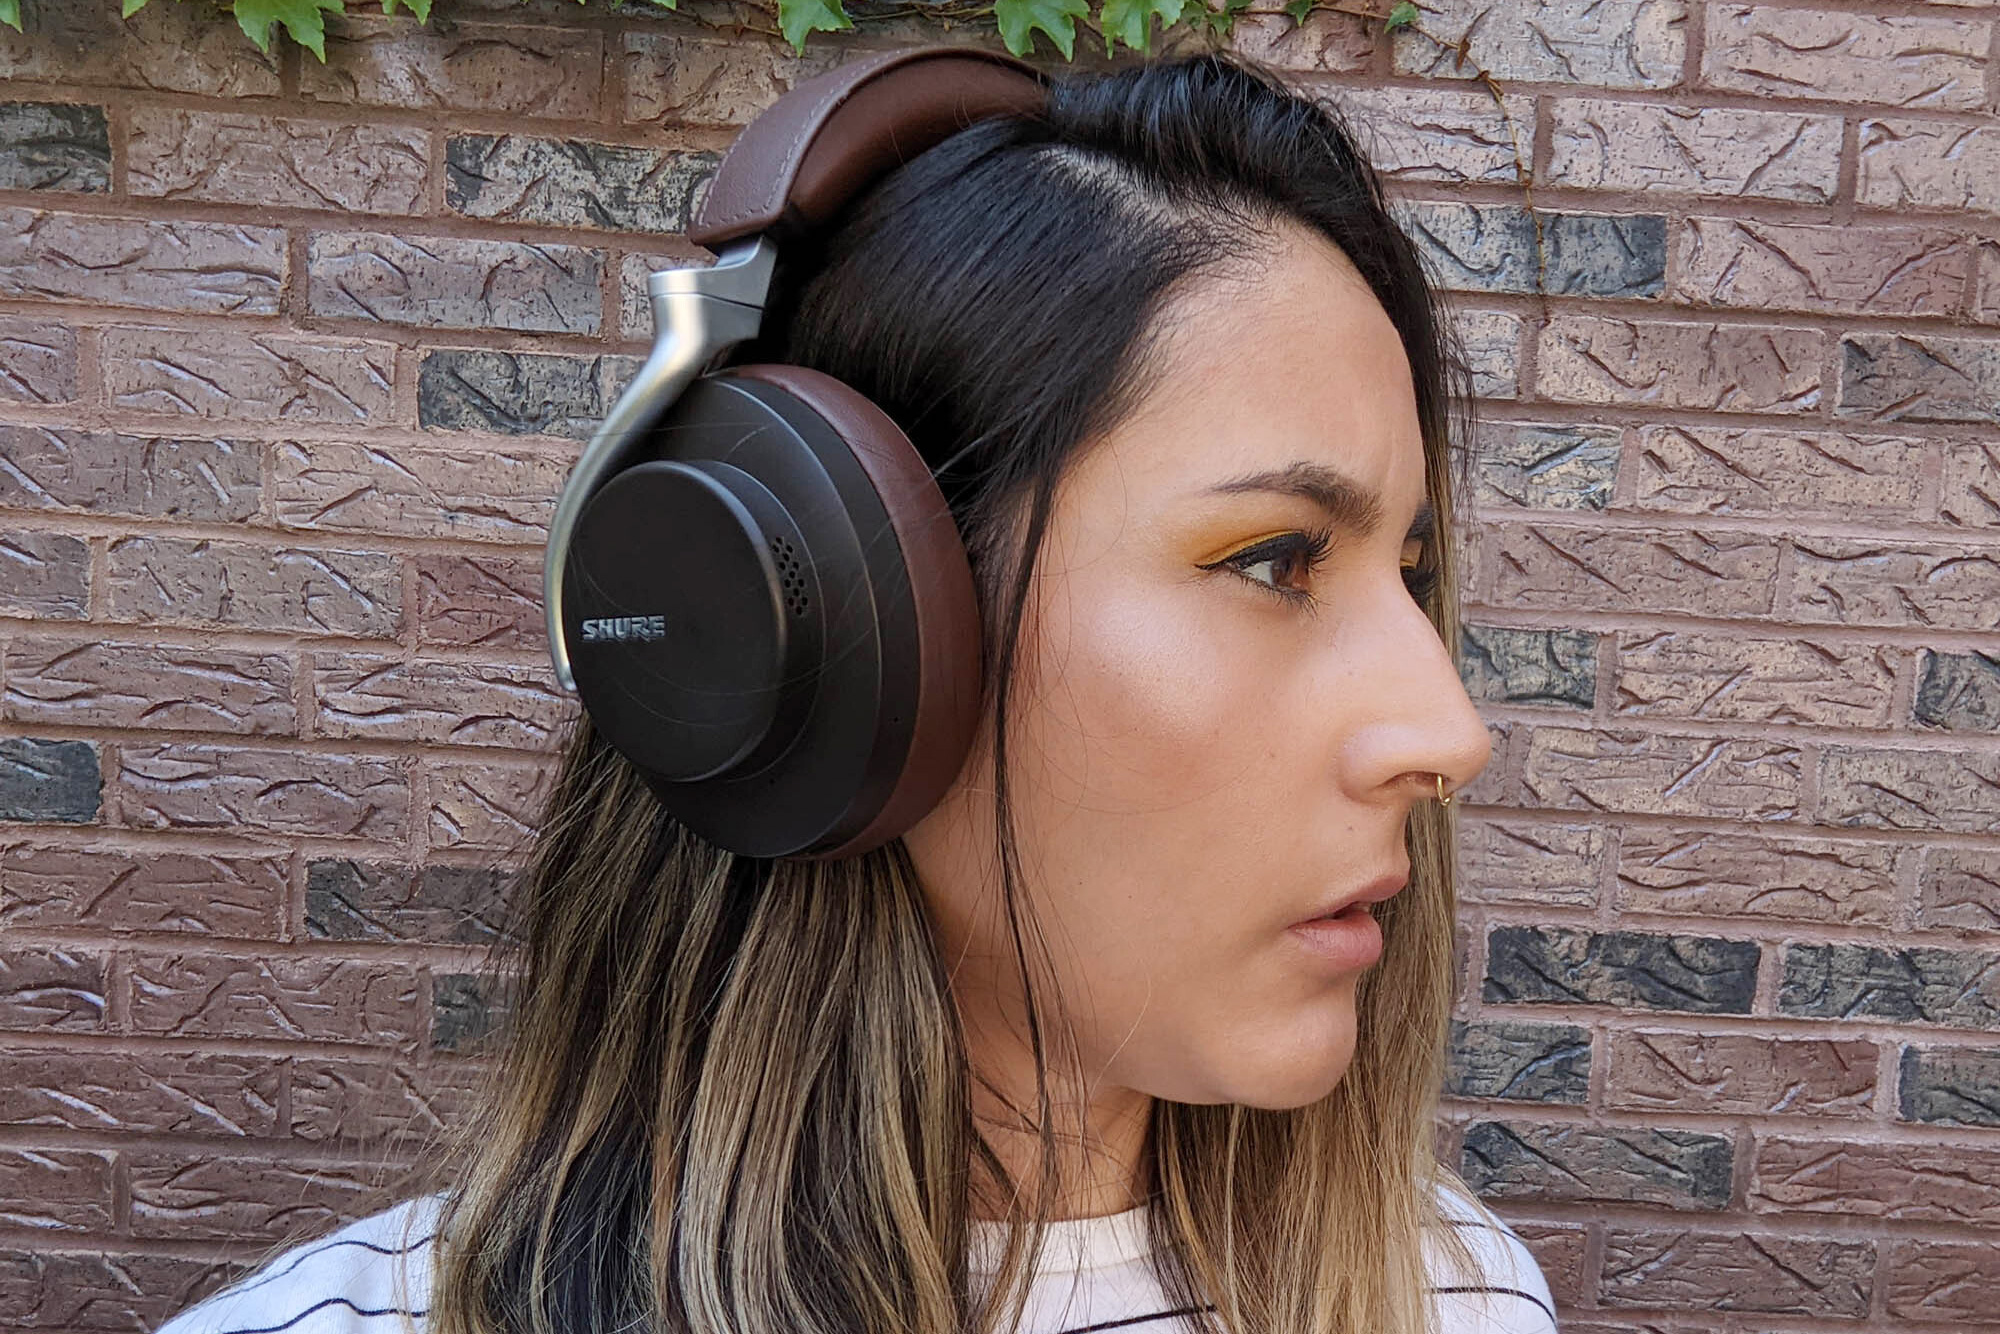 Shure AONIC 50 review: Studio-quality sound, but not reference-grade noise-canceling